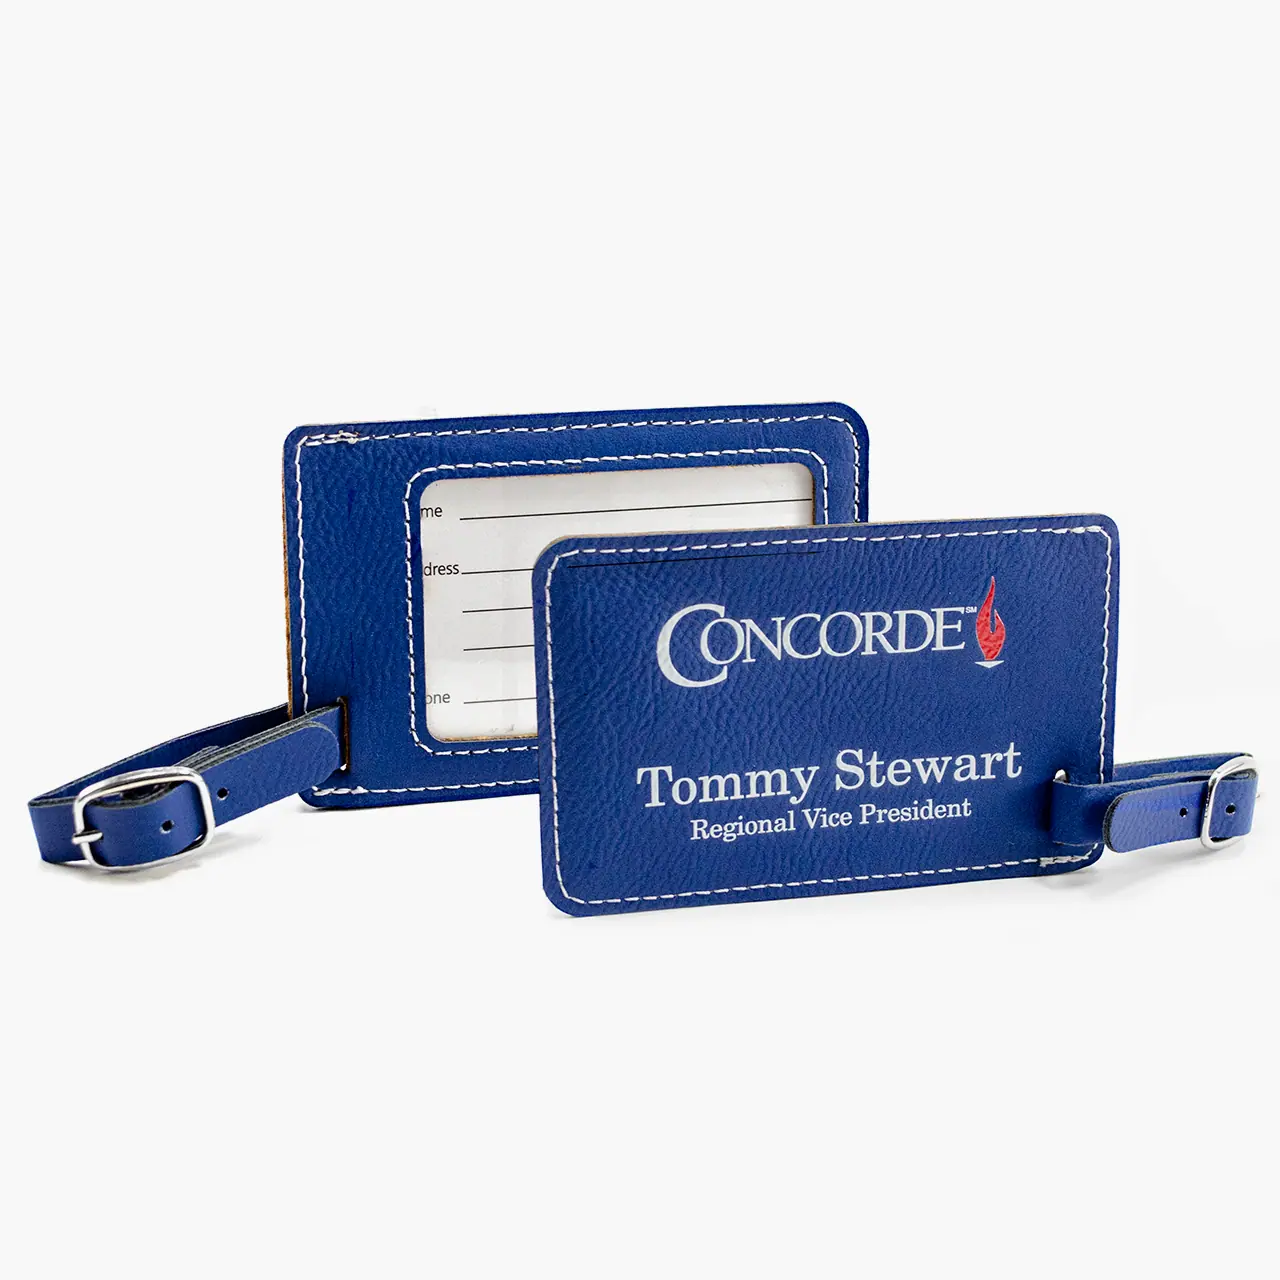 Engraved Leather Luggage Tags - Crystal Images, Inc.